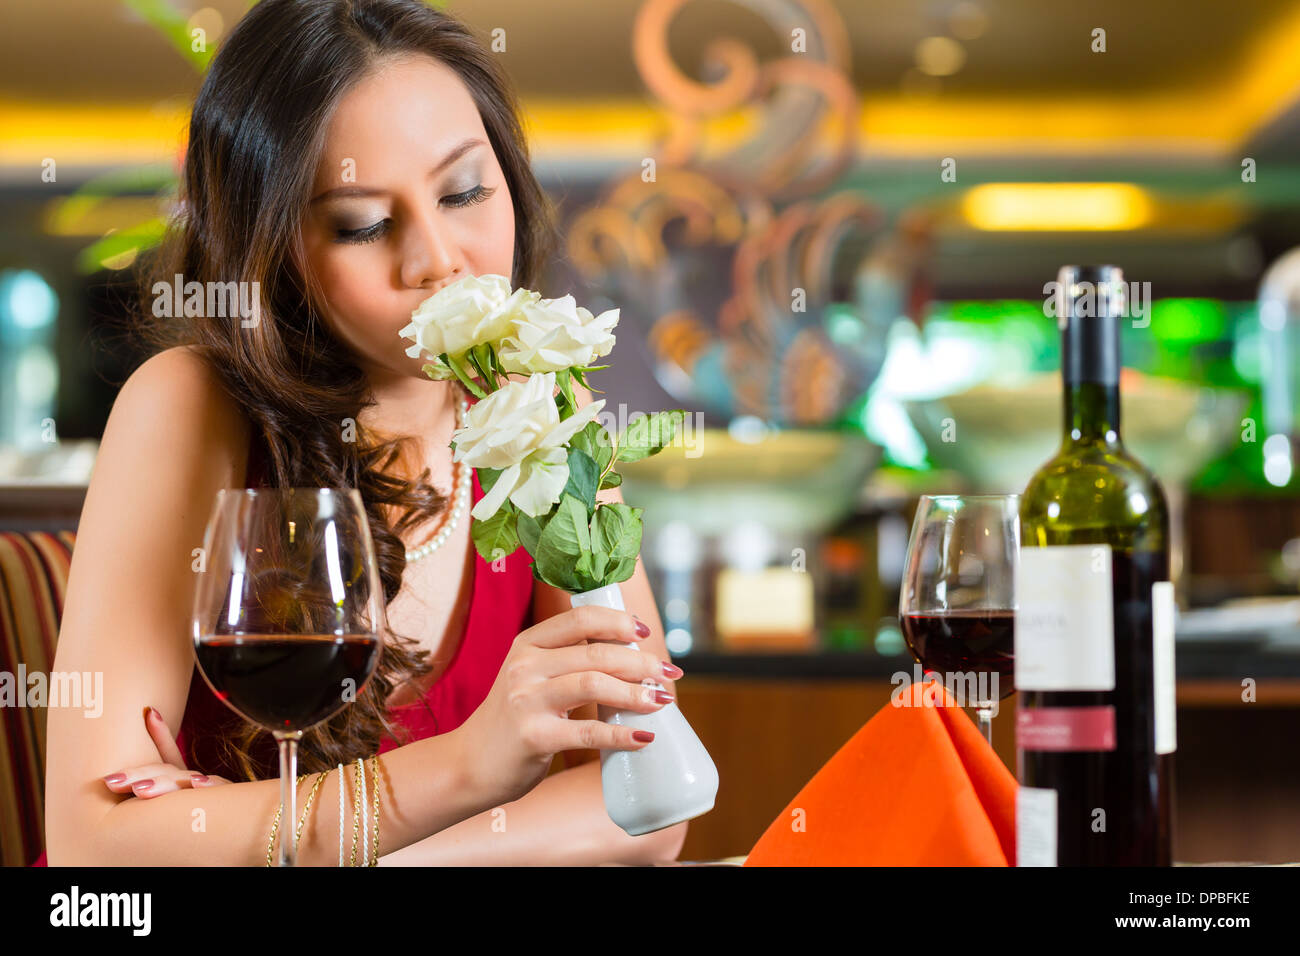 Chinese nervous, hoping, lonely, dreamy, heartsick woman in a restaurant waiting for a date got stood up Stock Photo